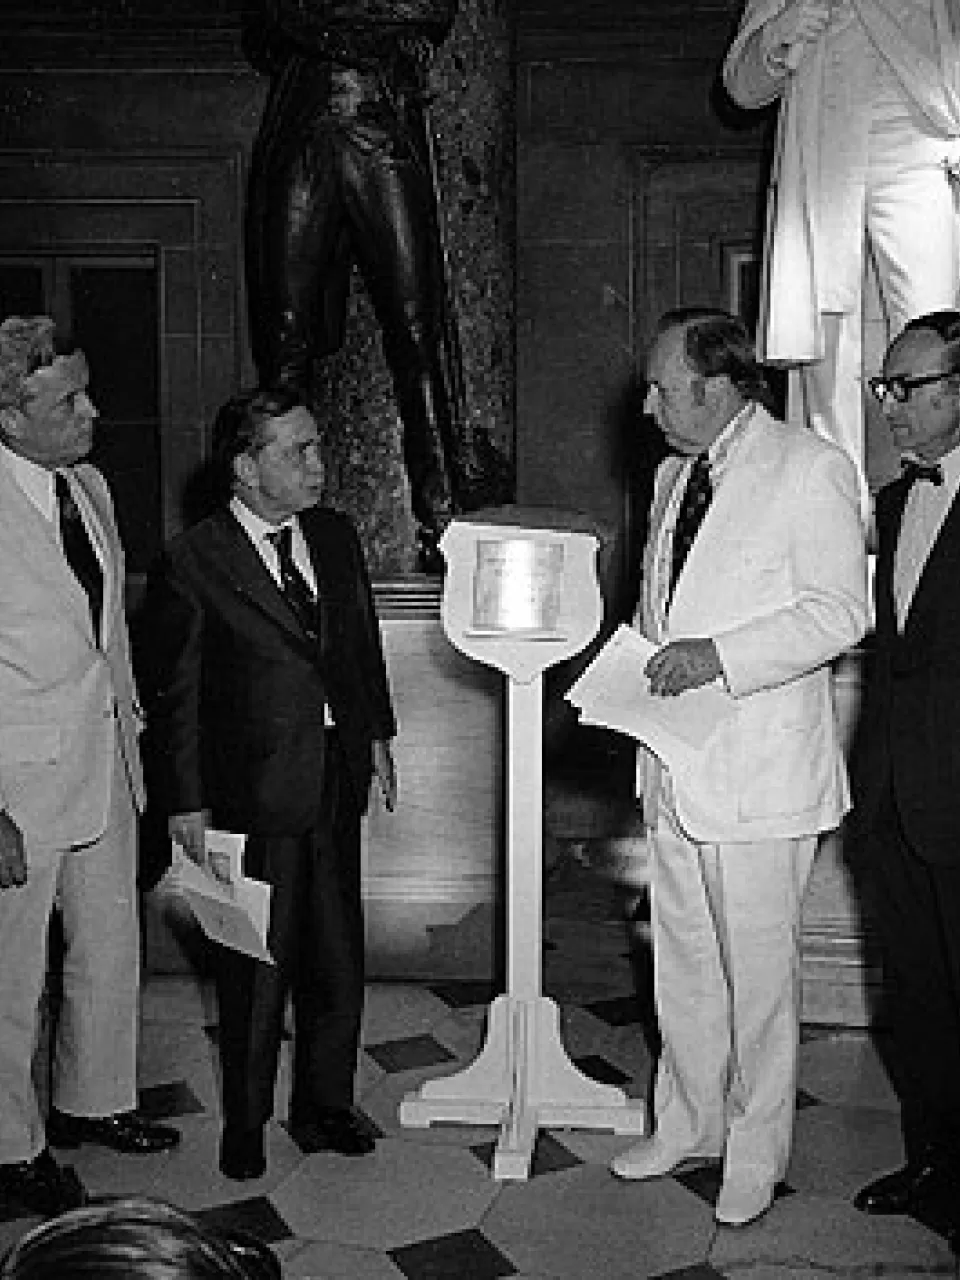 Unveiling and placement of the Lincoln desk marker in National Statuary Hall. Left to right: Representative Paul Findley, Speaker Carl Albert, Chairman Wayne L. Hays and 9th Architect of the Capitol George White.